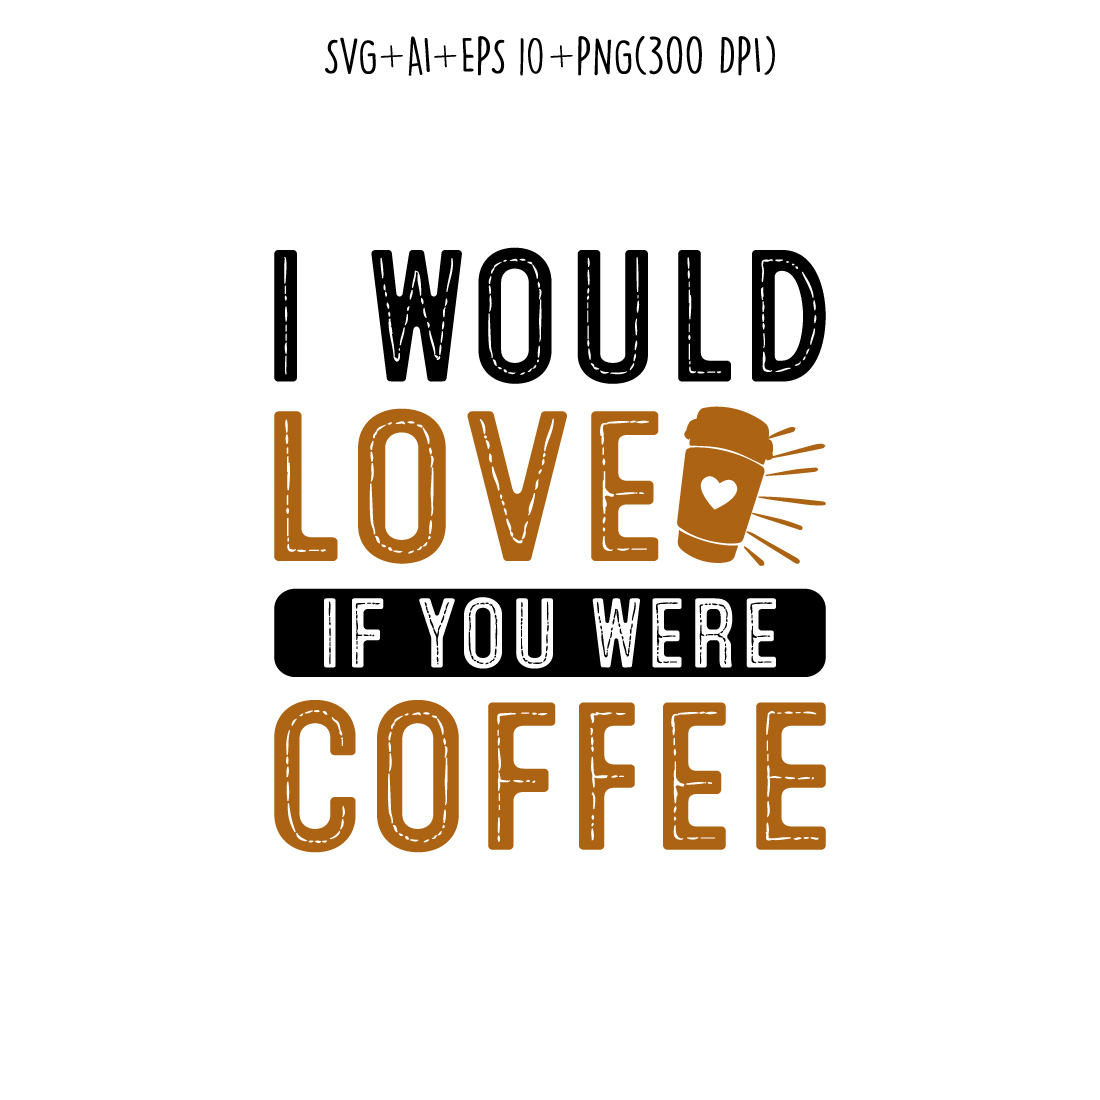 I would love if you were coffee coffee typography design for t-shirts, print, templates, logos, mug preview image.